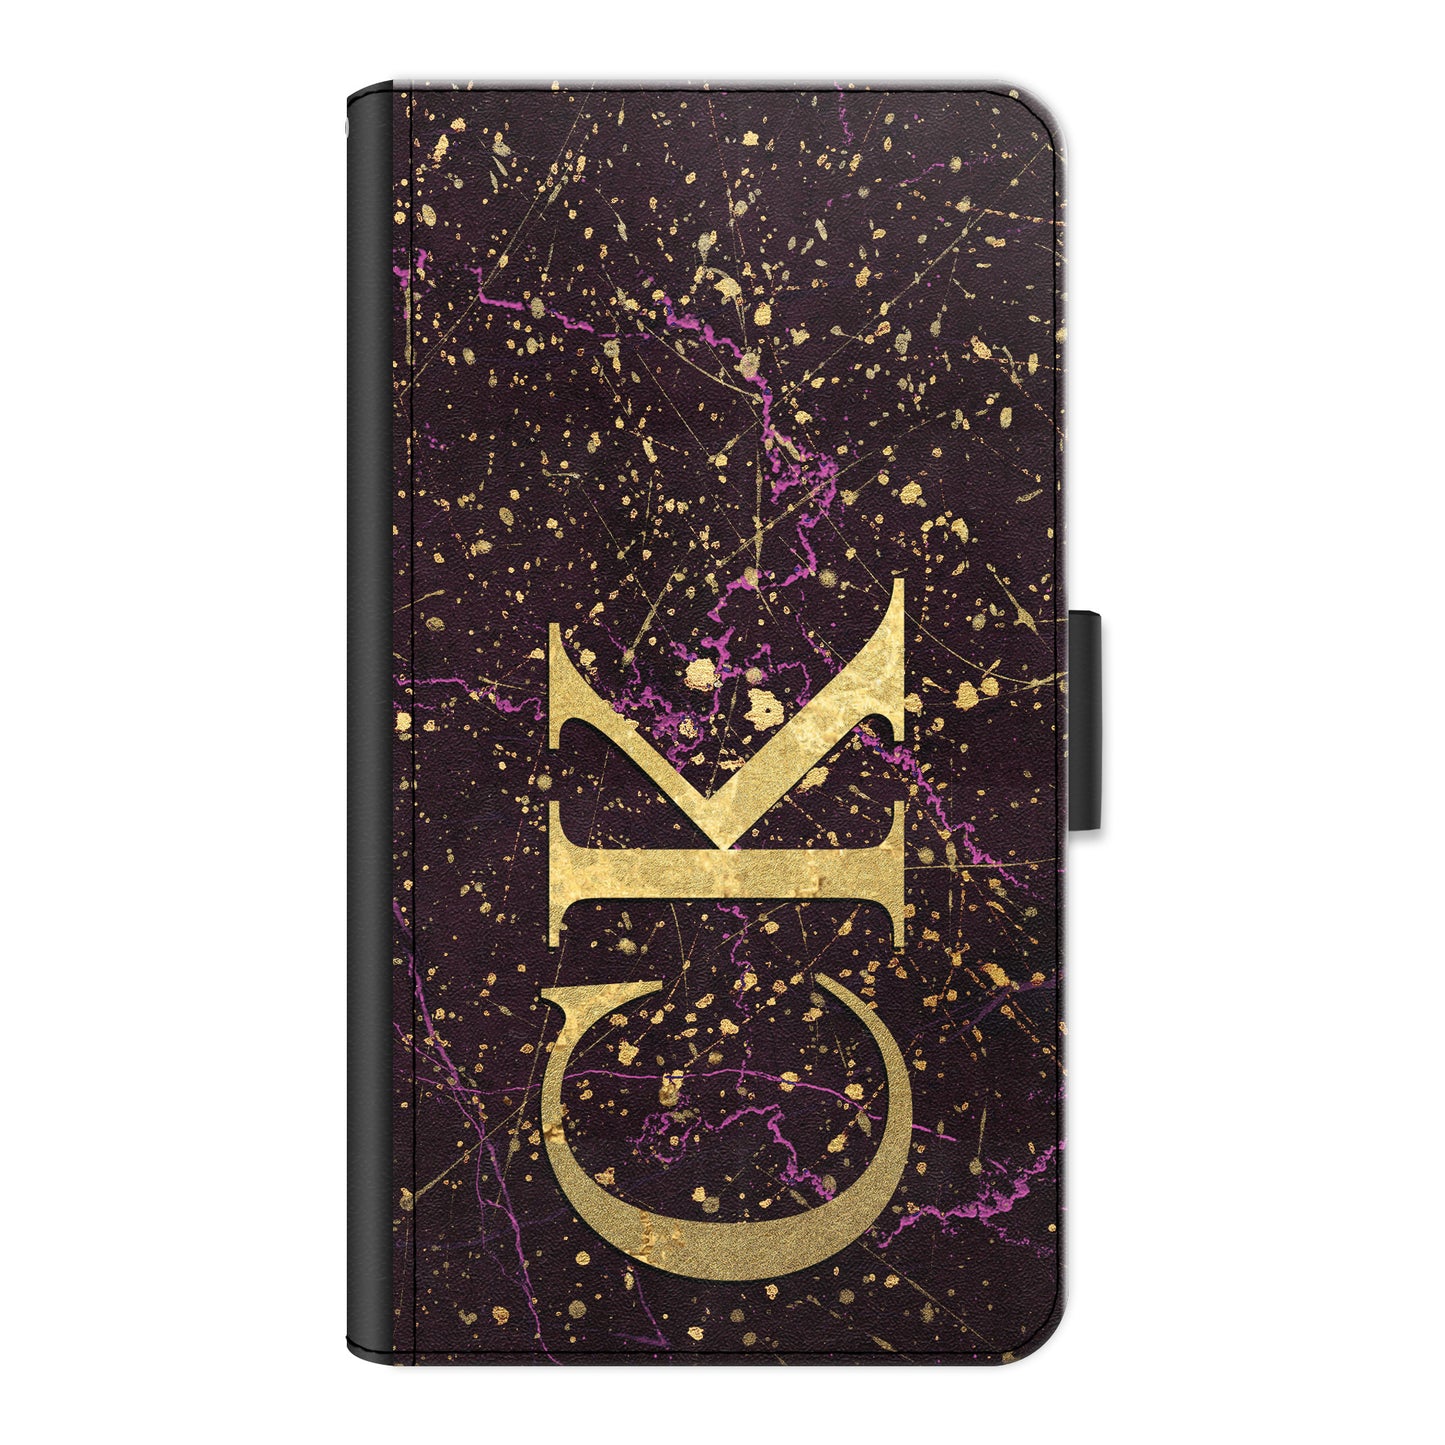 Personalised HTC Phone Leather Wallet with Gold Initials on Pink and Gold Infused Black Marble